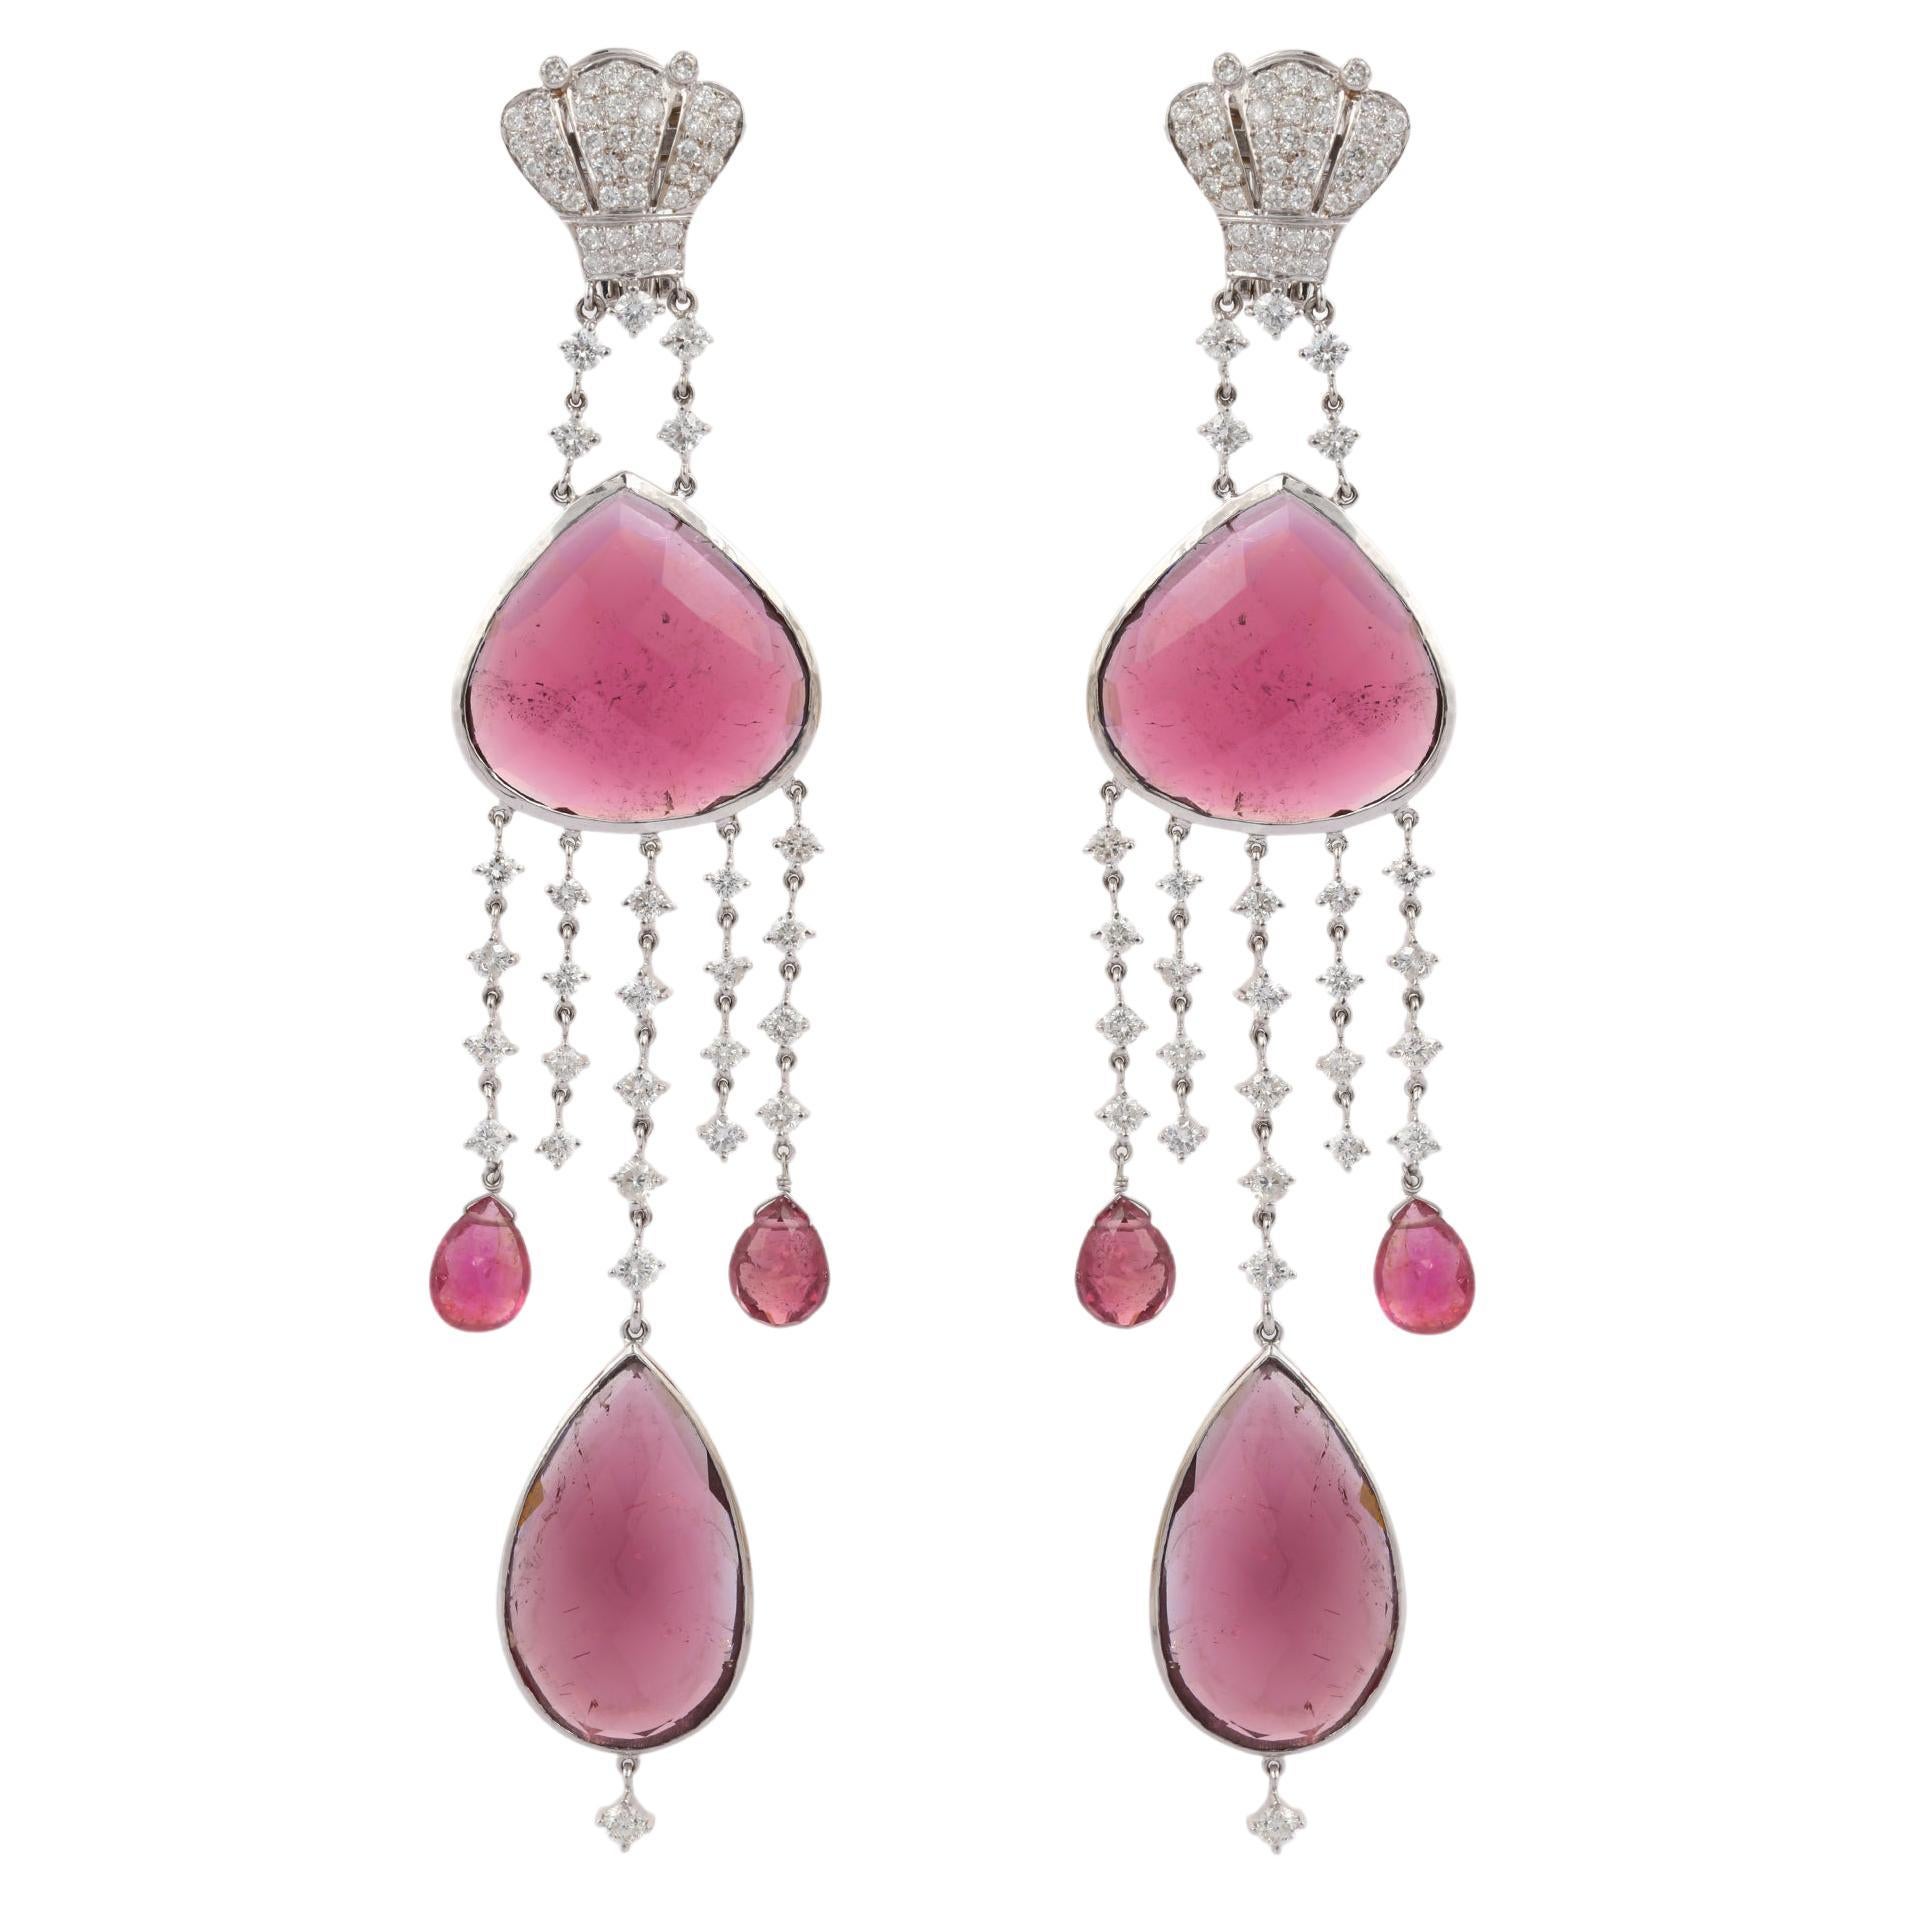 50.5 Carat Mixed Cut Ruby and Diamond Dangle and Drop Earrings in 18K White Gold